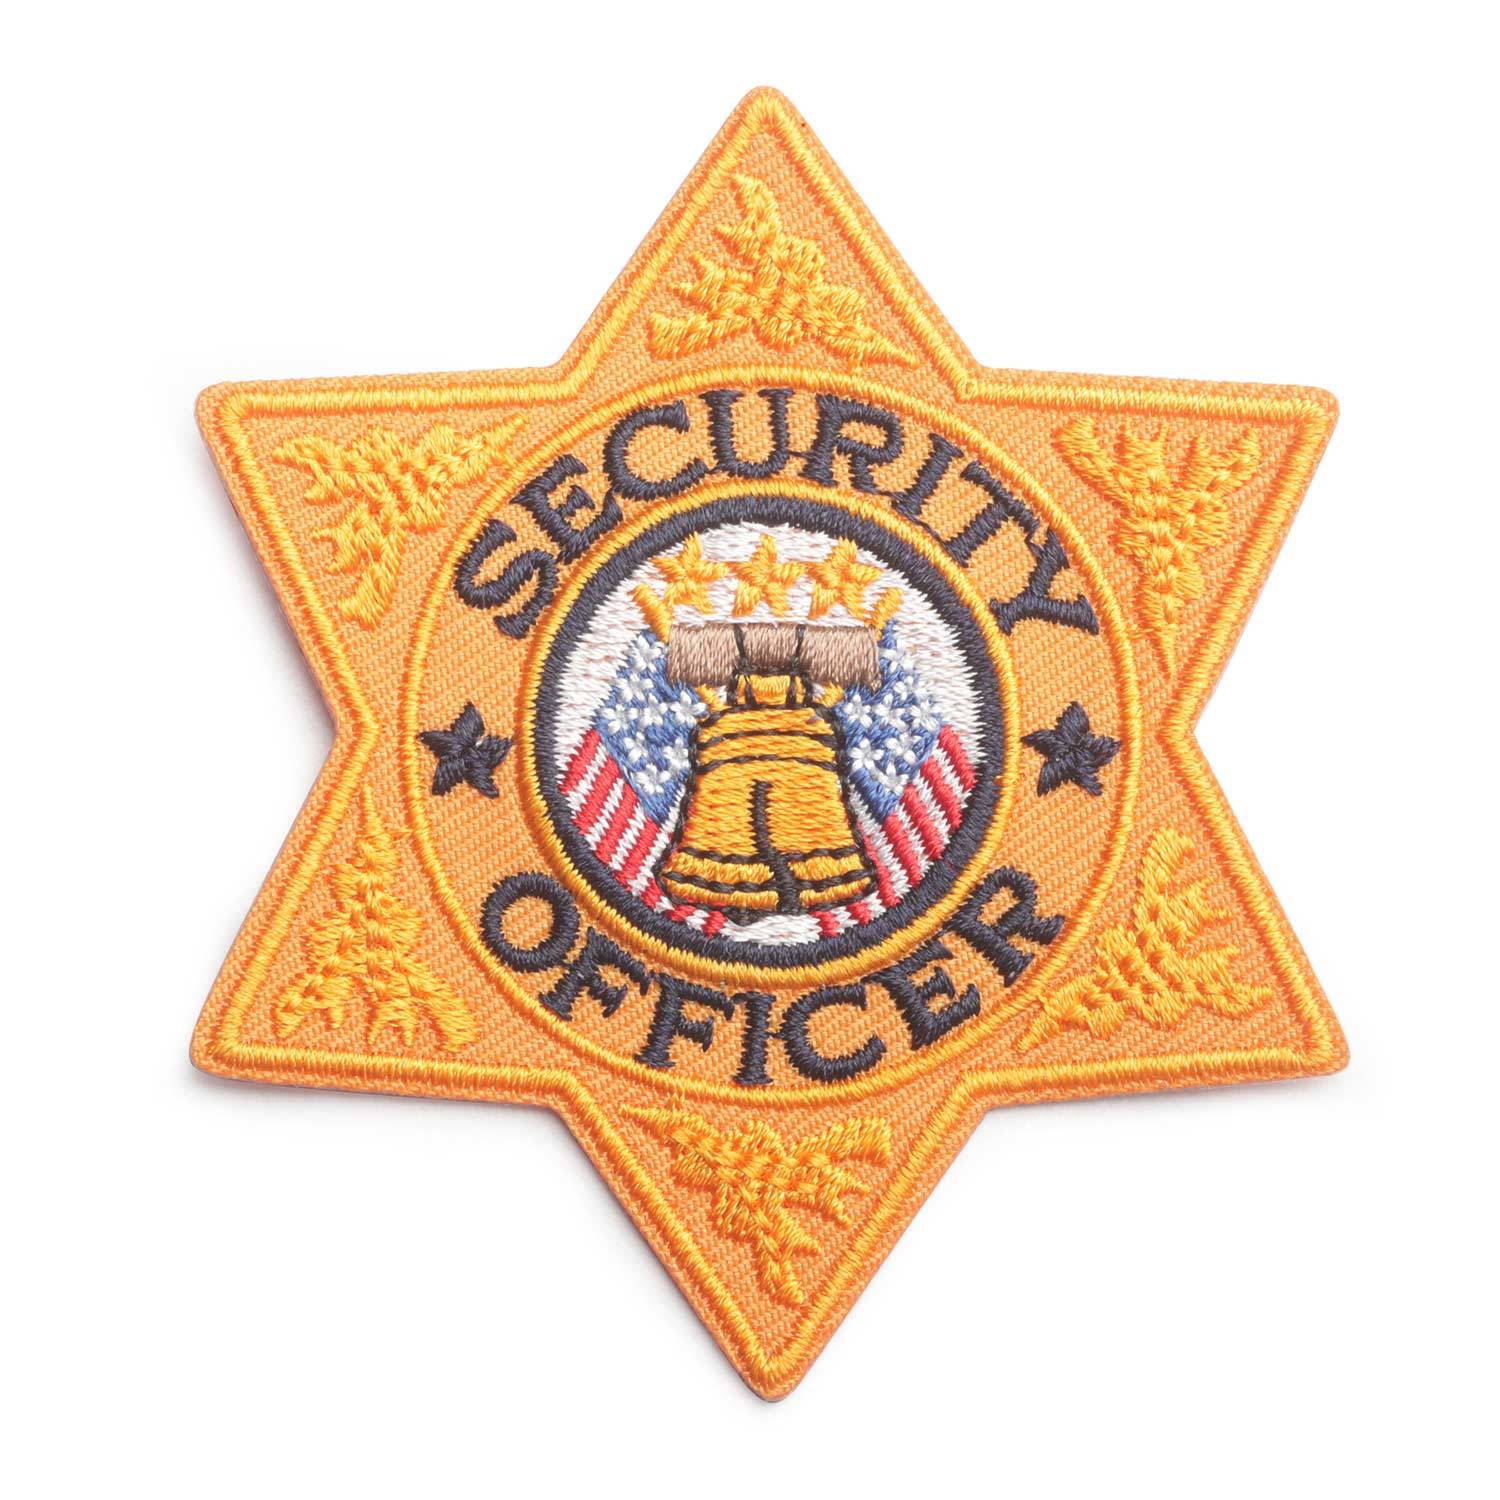 LAWPRO SECURITY OFFICER 6 POINT STAR